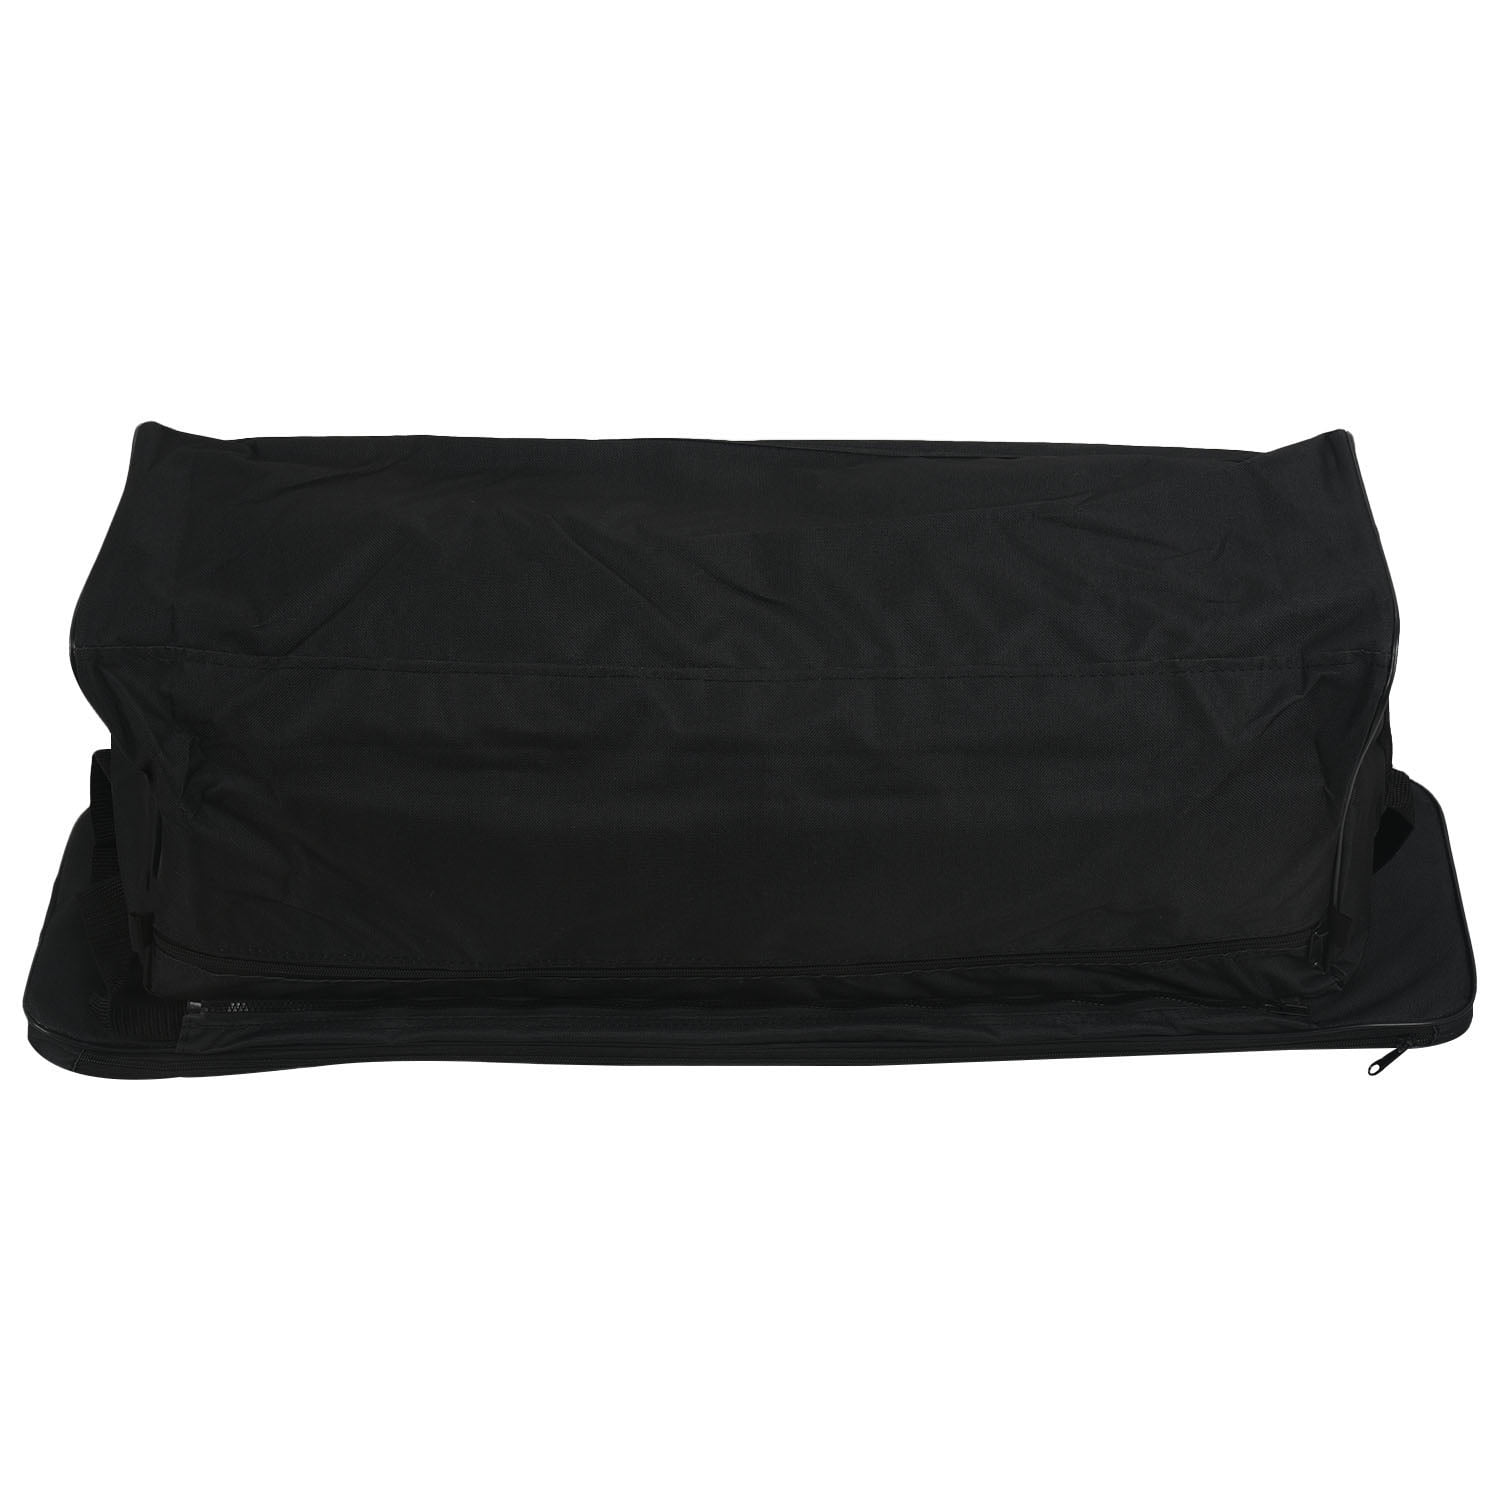 Canoe Inflatable Boat Seat Storage Bag with Padded Seat Cushion N2E5 